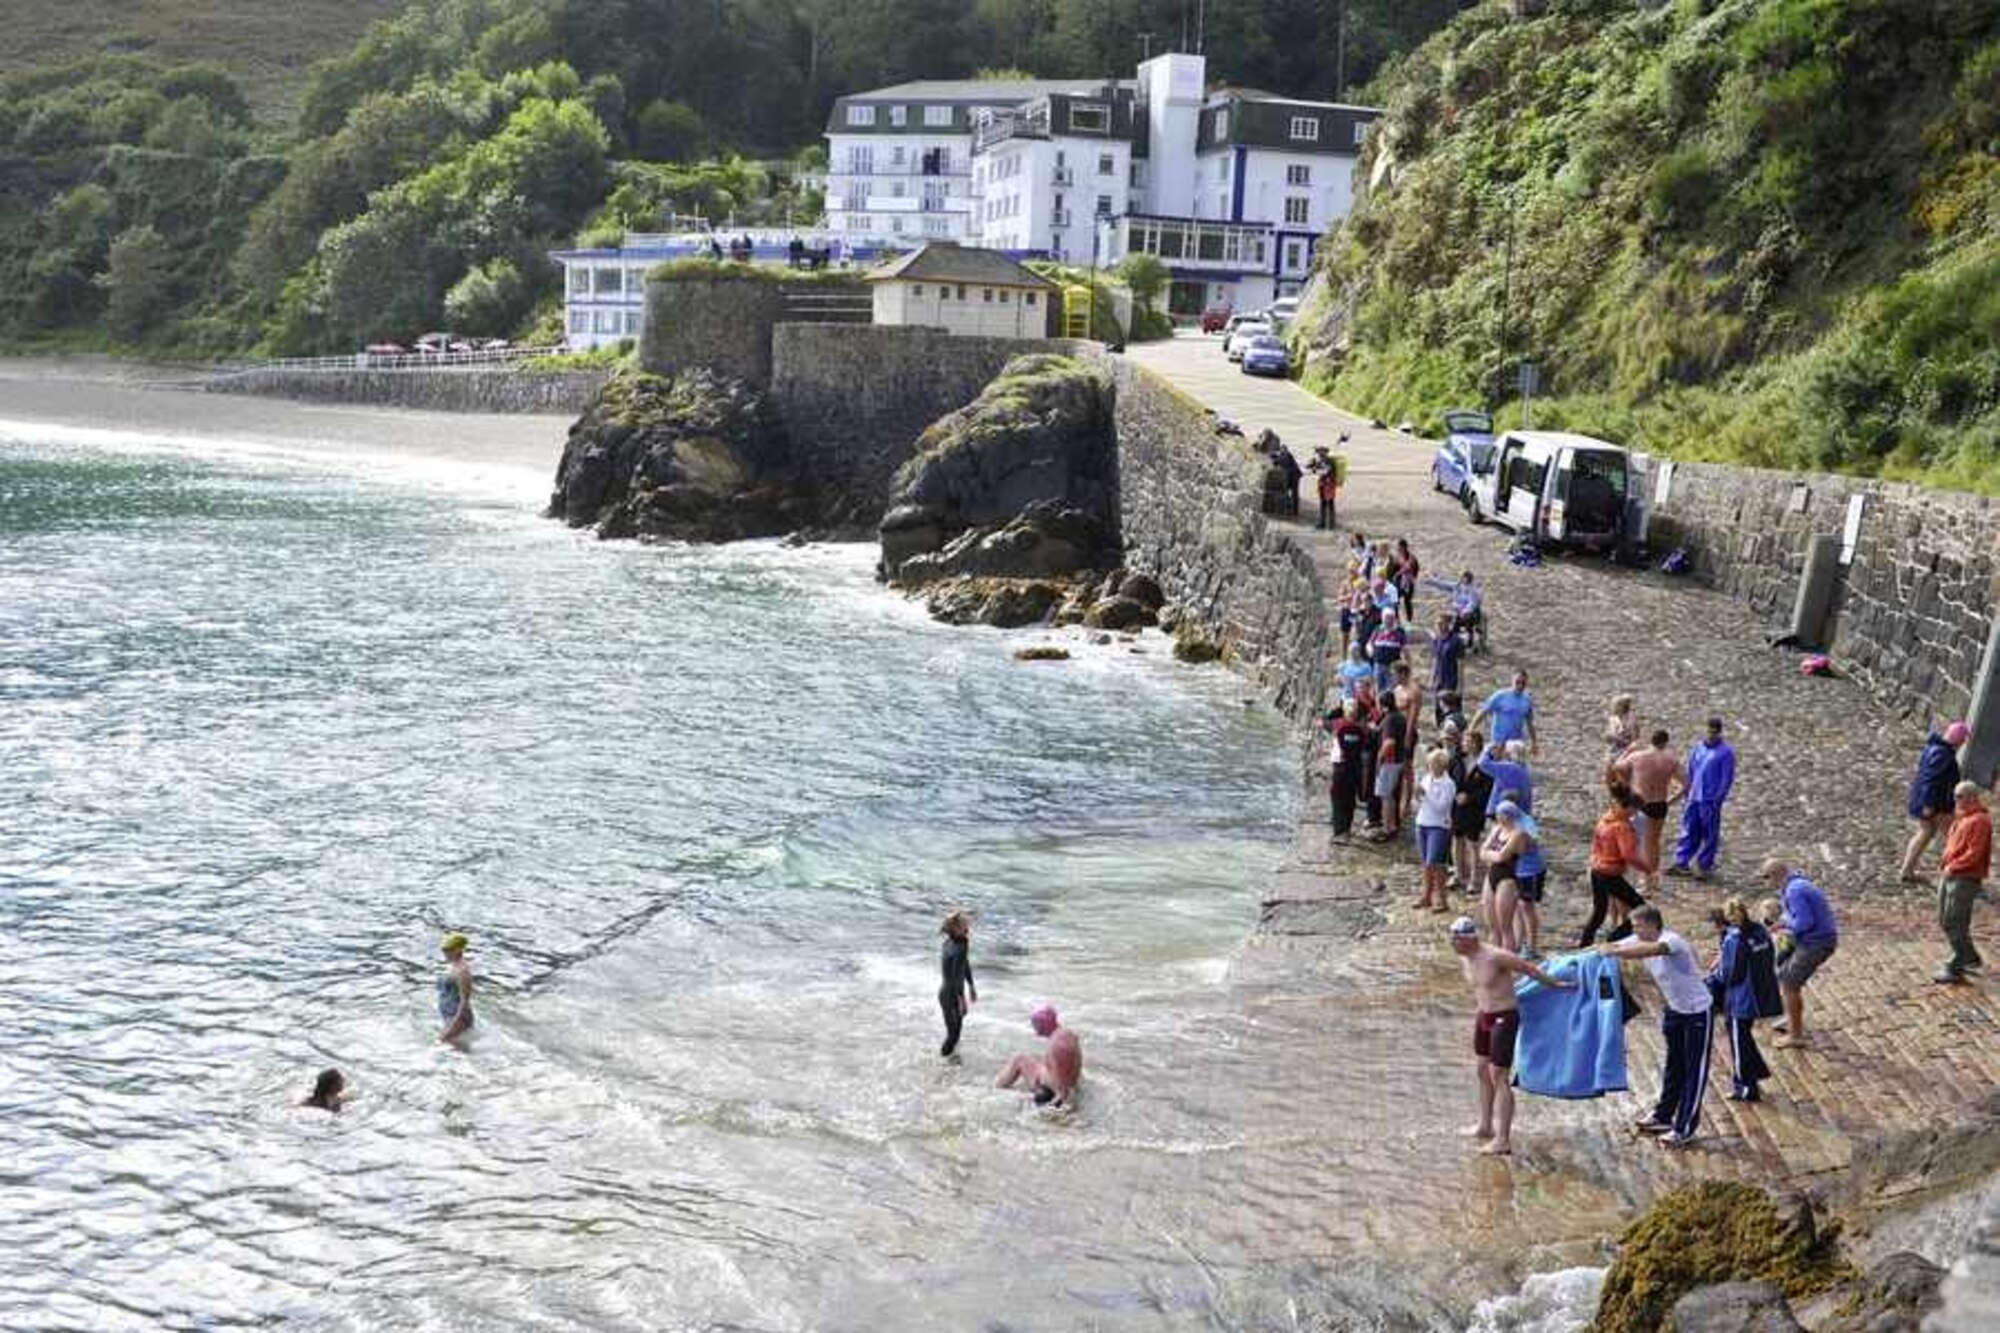 The round island swim was moved to the sheltered waters of Bouley Bay due to high winds and unfavorable swimming conditions.  USAF photo by Tony Pike 